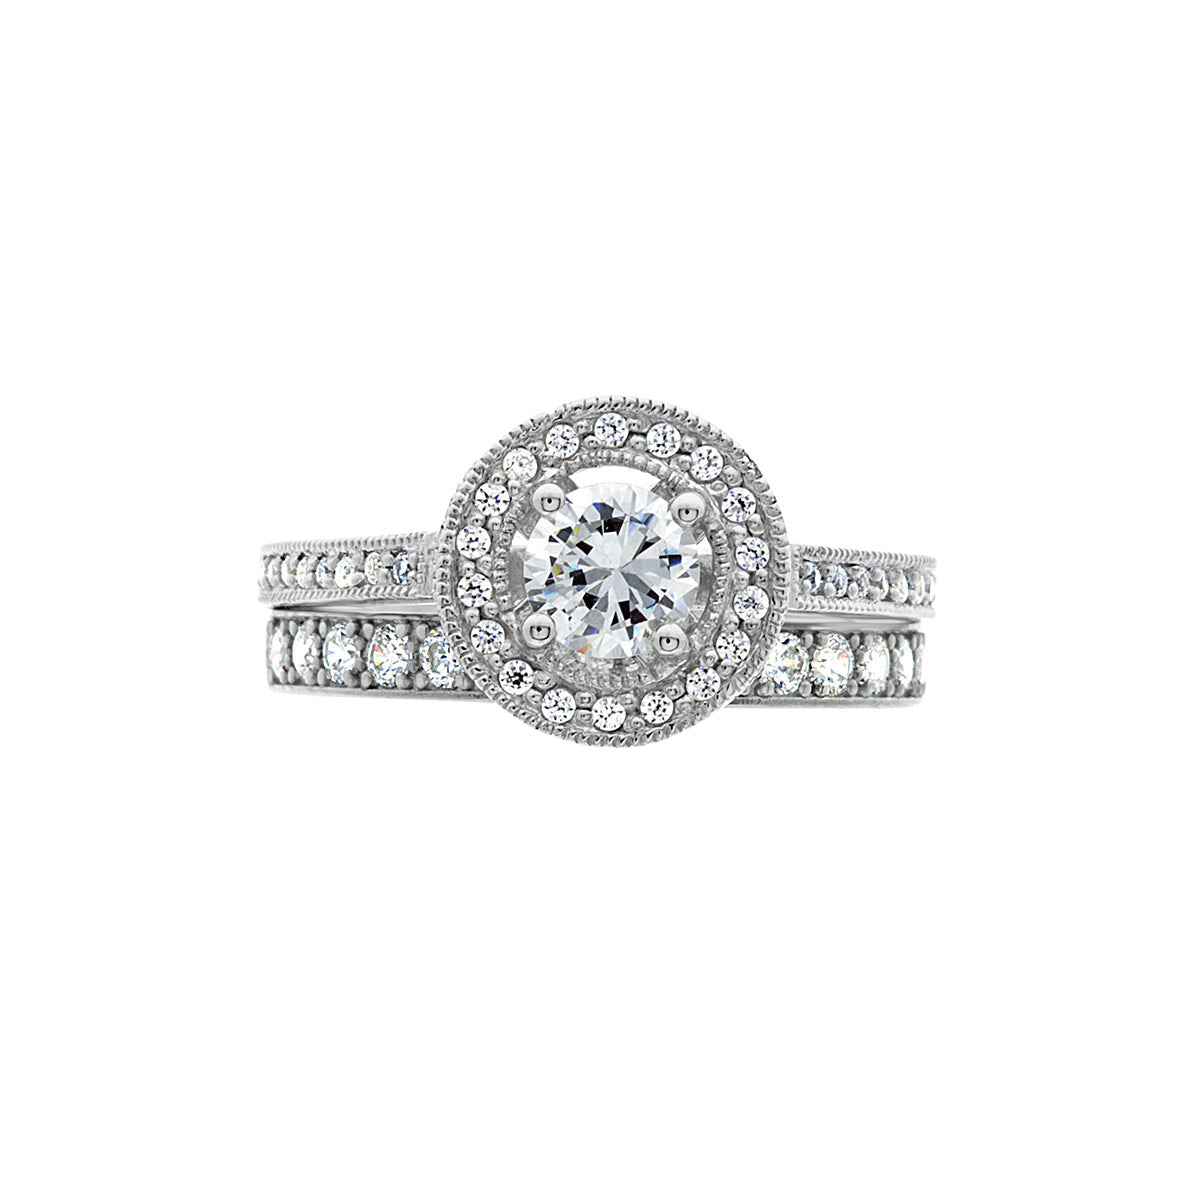 Vintage Style Ring in White Gold laying horizontal with a matching diamond set wedding ring